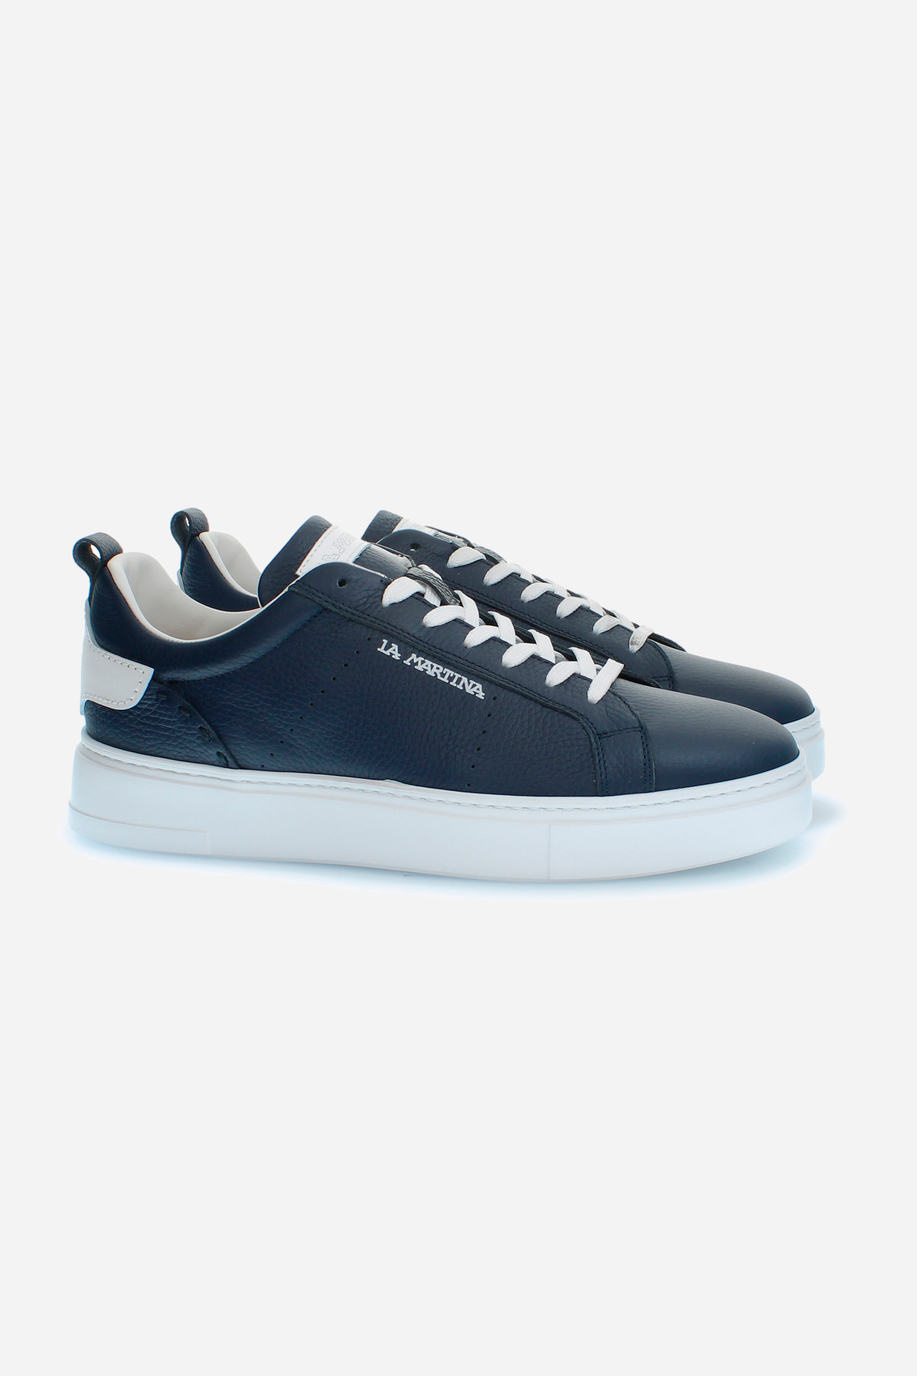 Men's leather trainers - Shoes and Accessories | La Martina - Official Online Shop